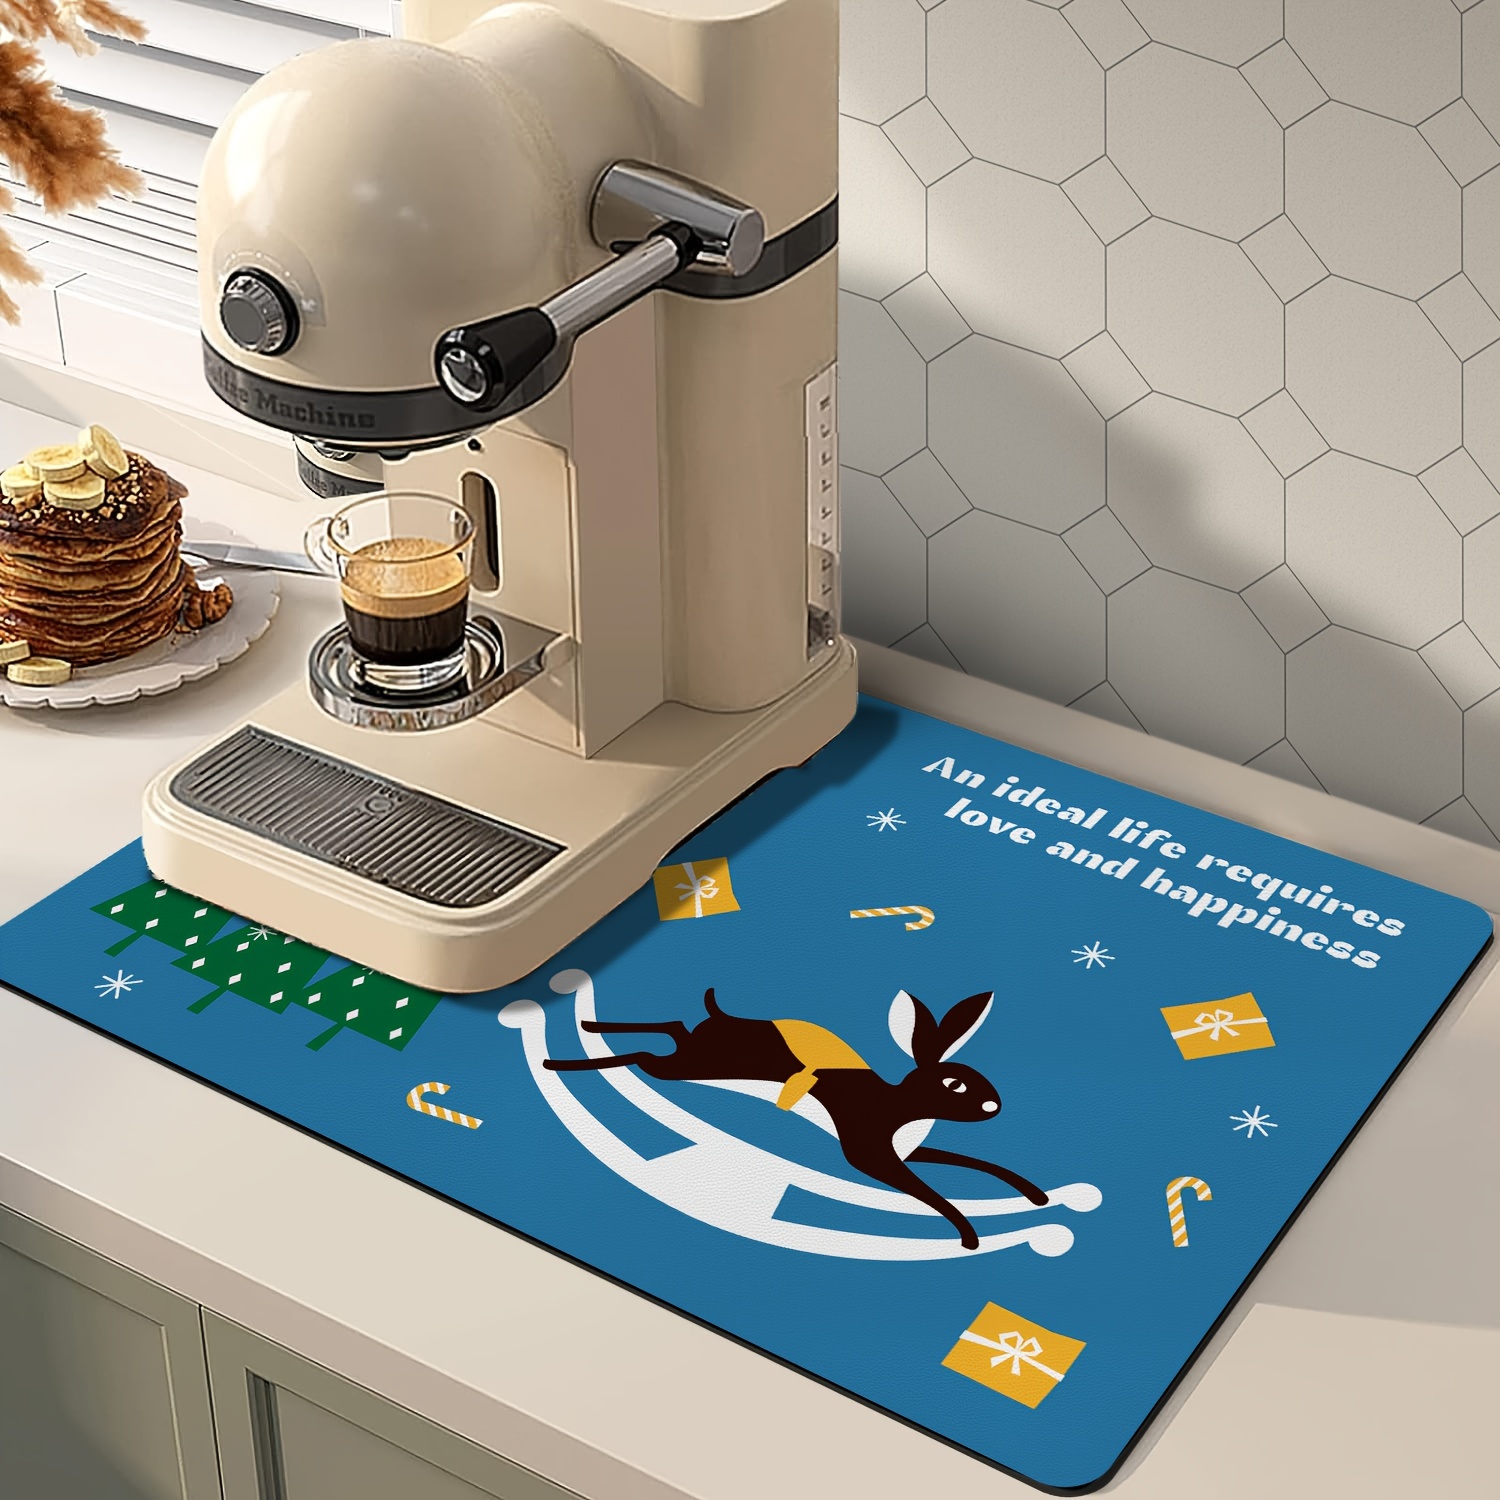 Coffee Mat Dish Drying Mat for Kitchen Counter, Hide Stain Absorbent Rubber  Backed Quick Drying Mat Fit Under Coffee Maker Espresso Machine, Coffee